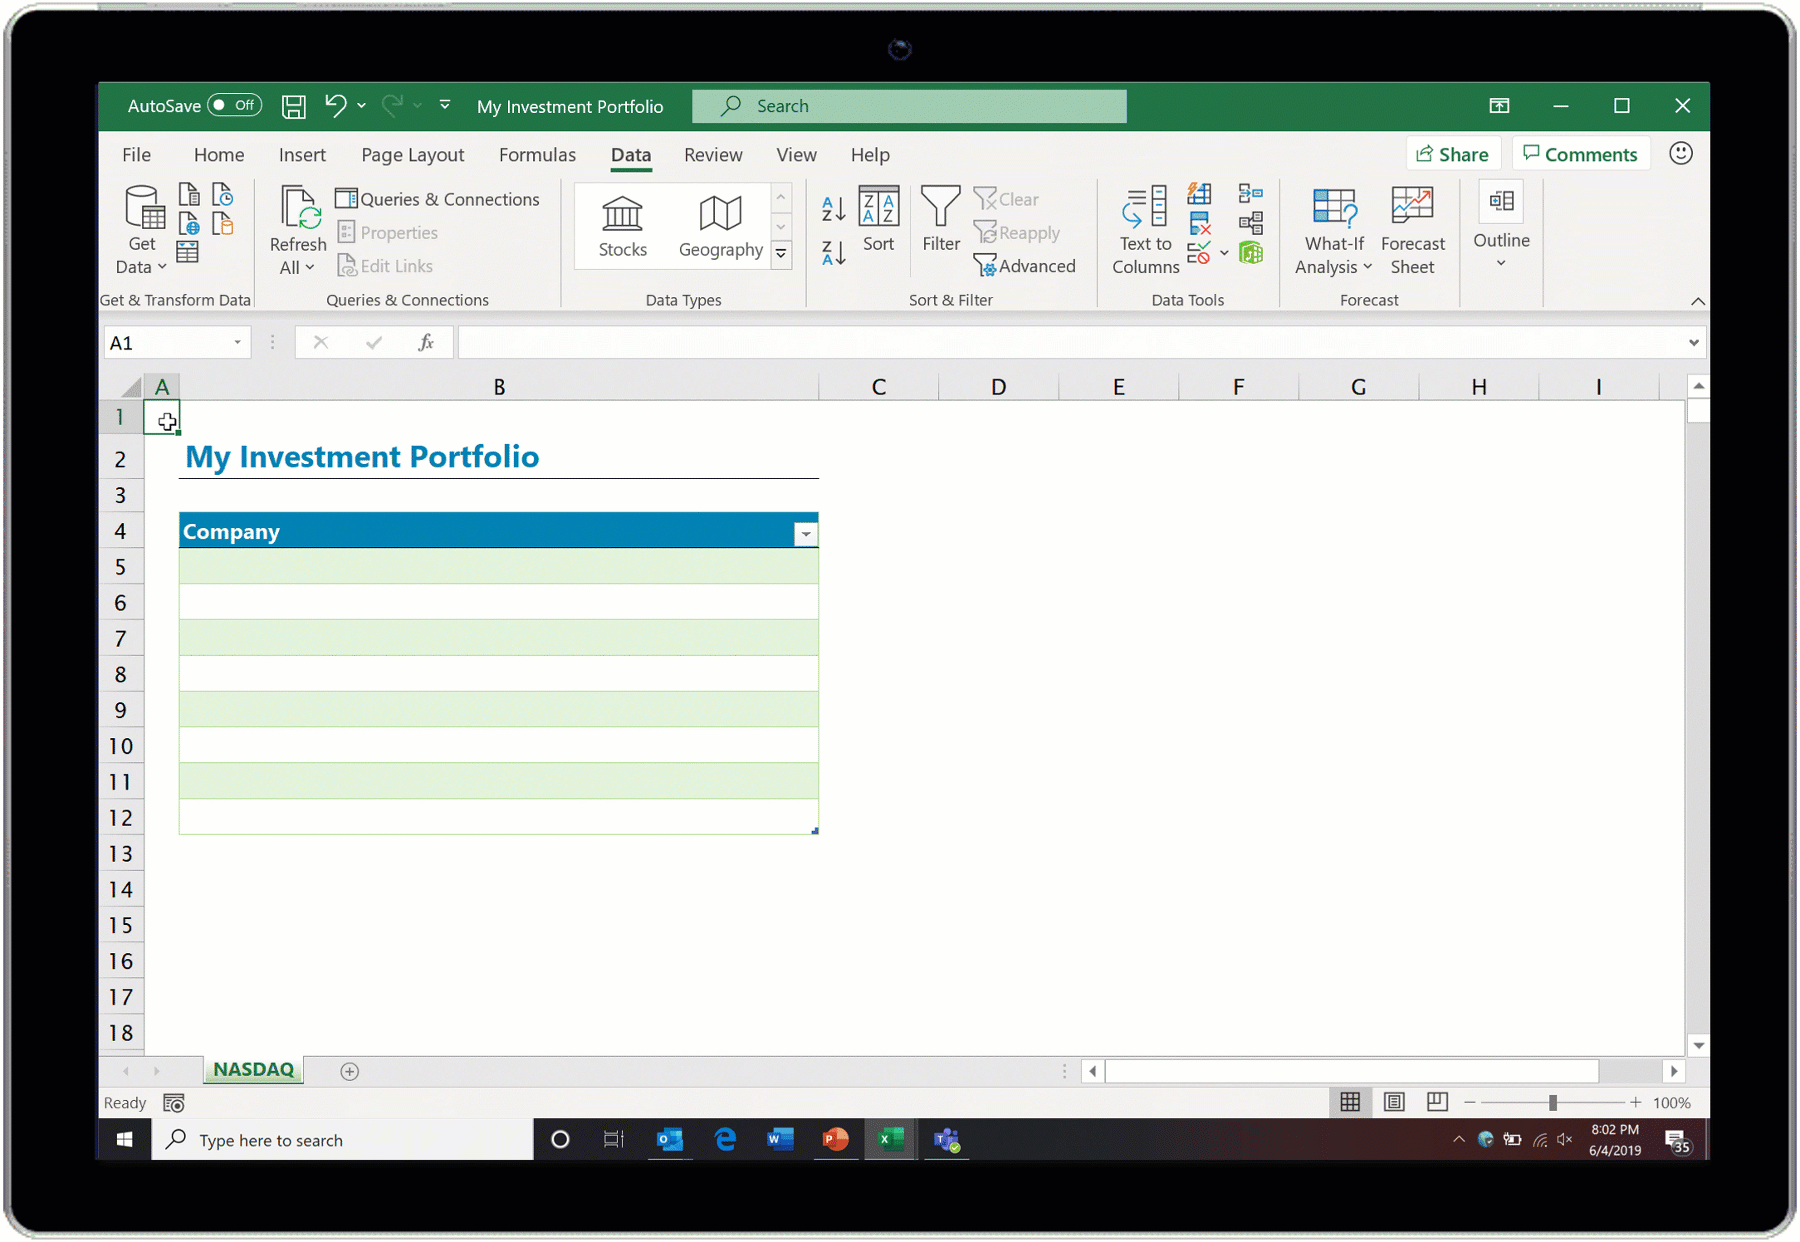 Animated screenshot of the Stocks Data Type in action in Excel.